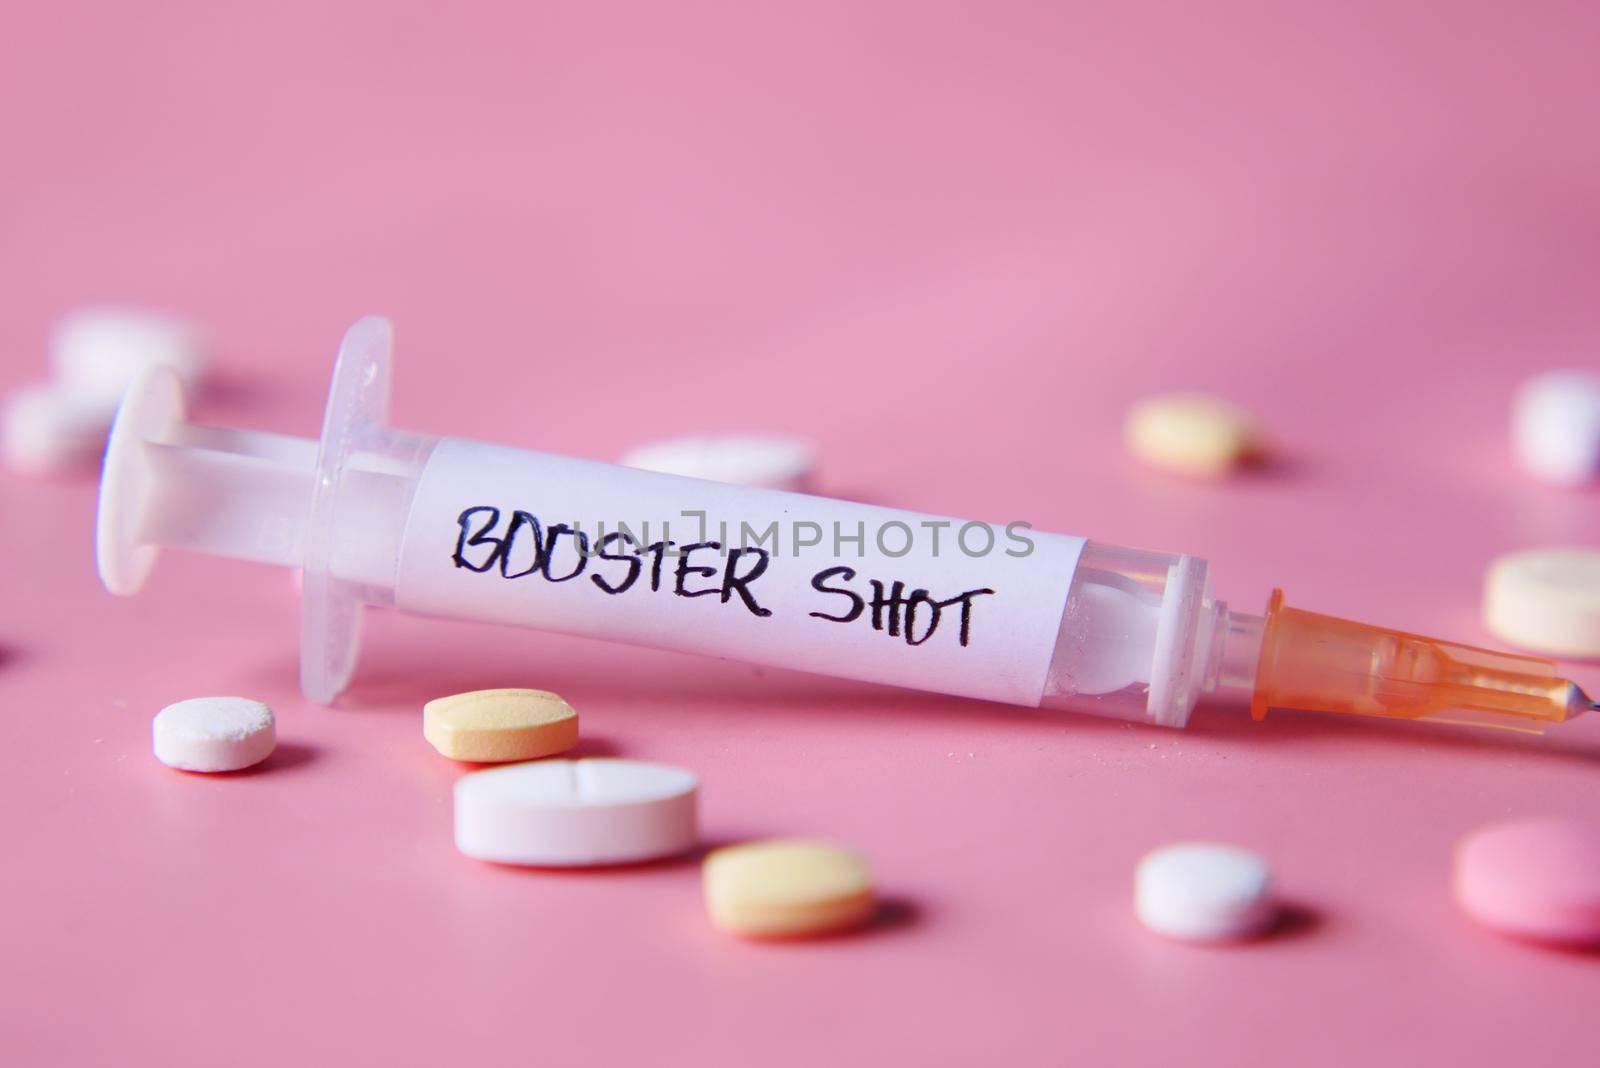 booster shot test on syringe and pills on pink background, close up by towfiq007